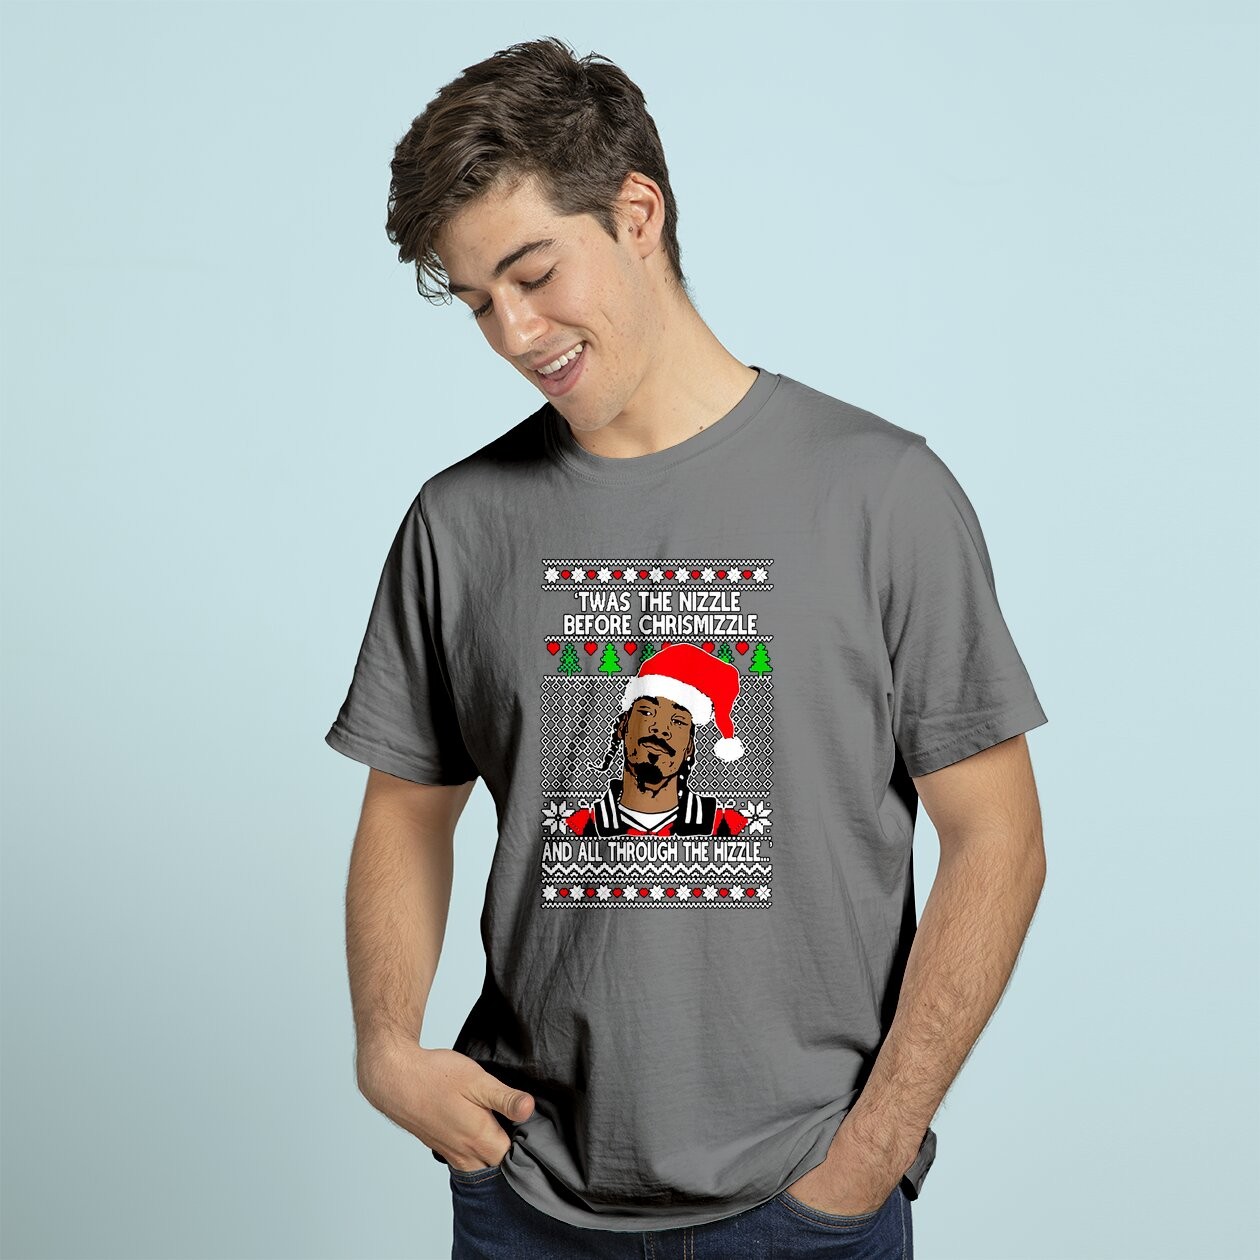 Snoop Dogg ‘Twas The Nizzle Before Chrismizzle Ugly Christmas Graphic Tee DZT